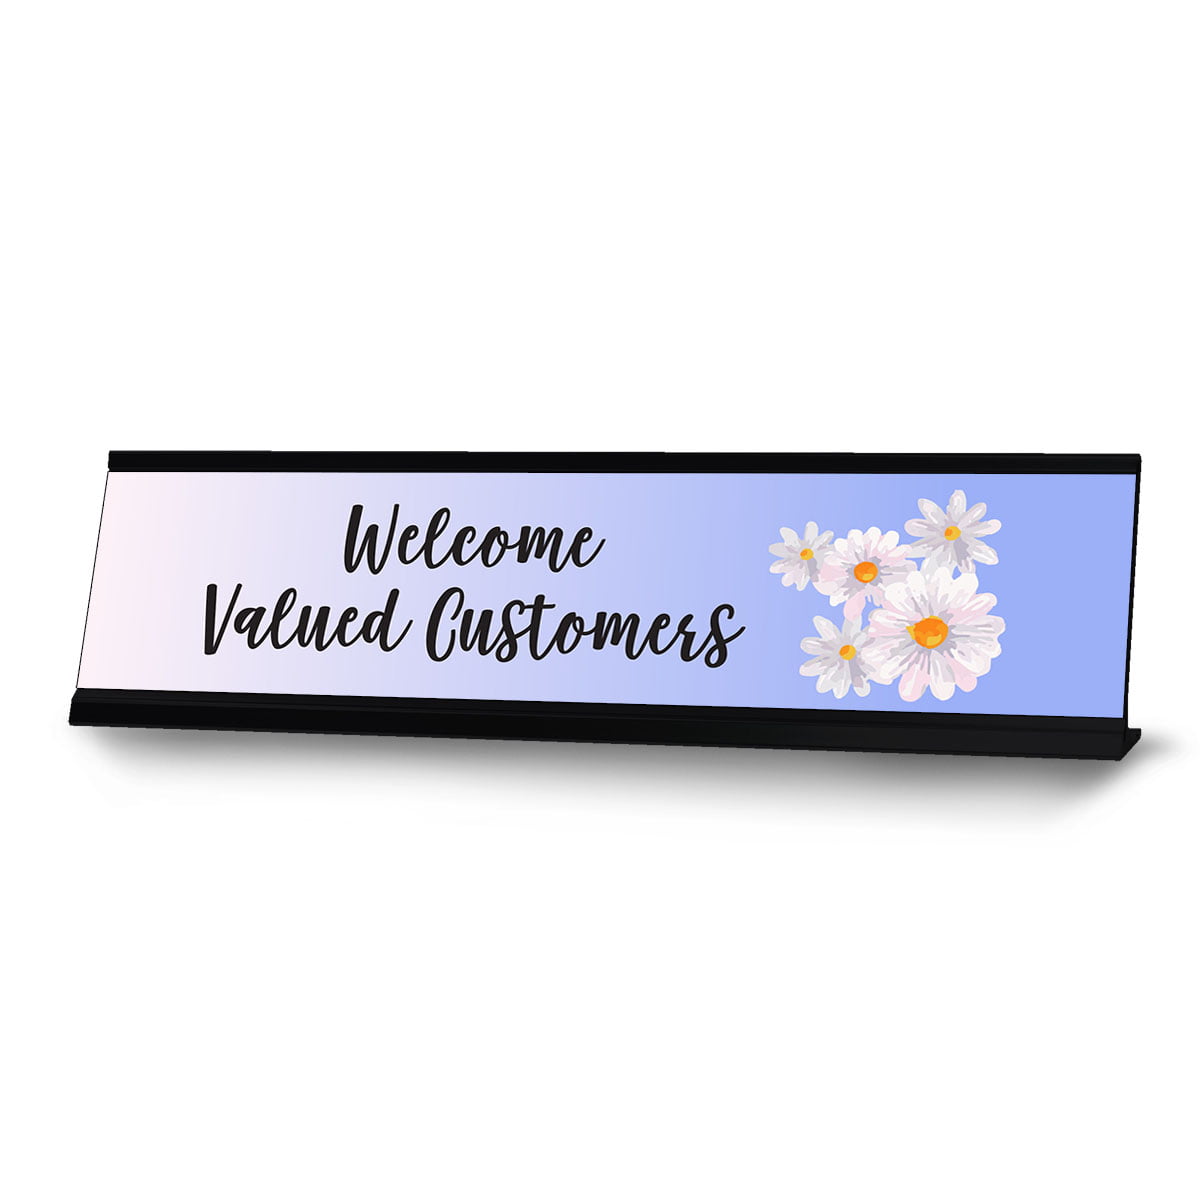 Receptionist 9x3 Door Sign Business Commercial Plastic W Adhesive